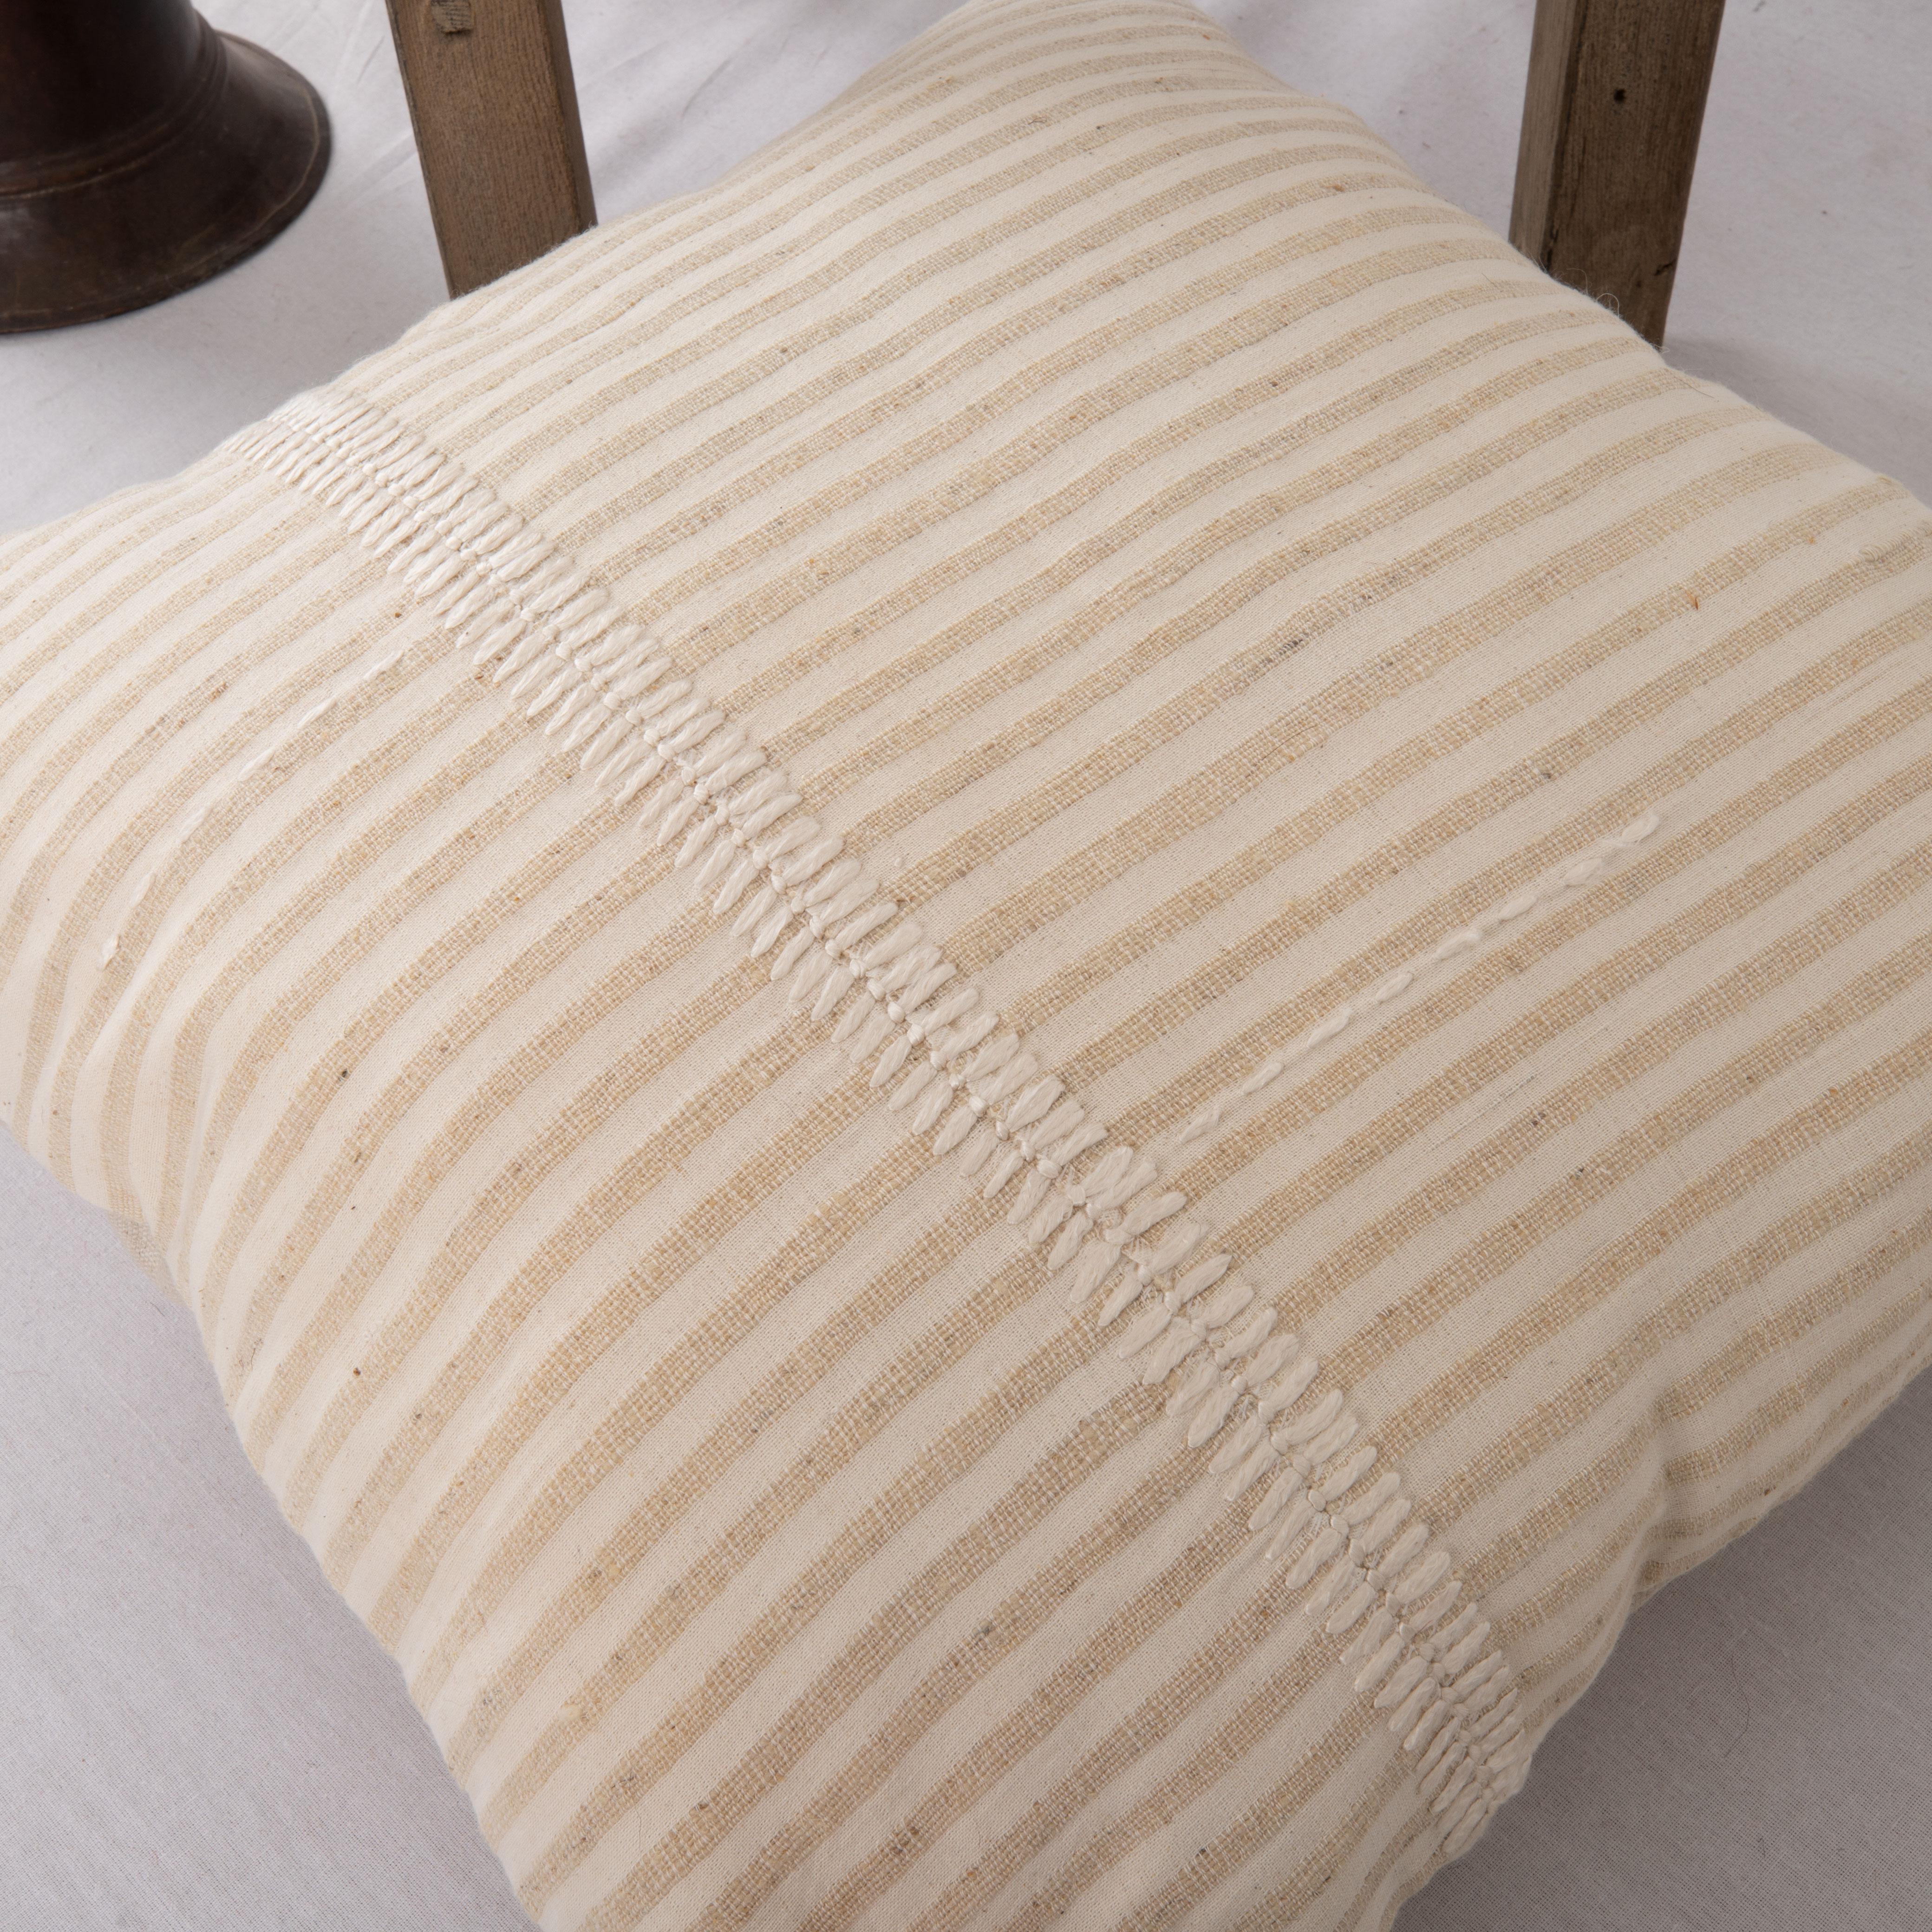 Hand-Woven Mid 20th C. Pillow Cover Made from Vintage Anatolian Covers